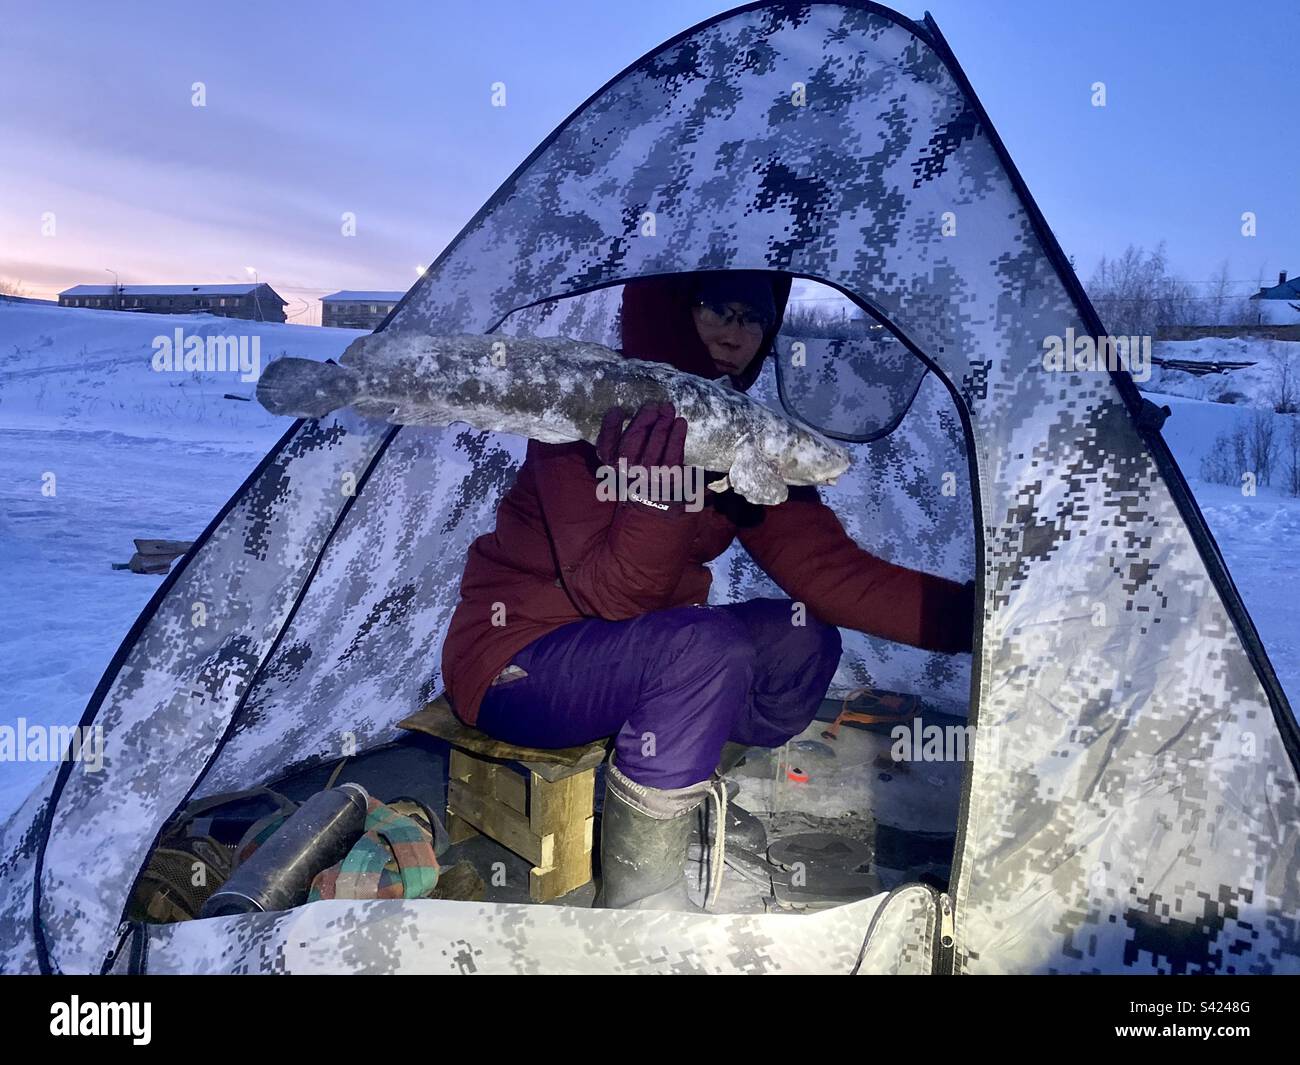 A Yakut girl is fishing in a tent in winter in the cold with snow in the village of Yakutia. Stock Photo